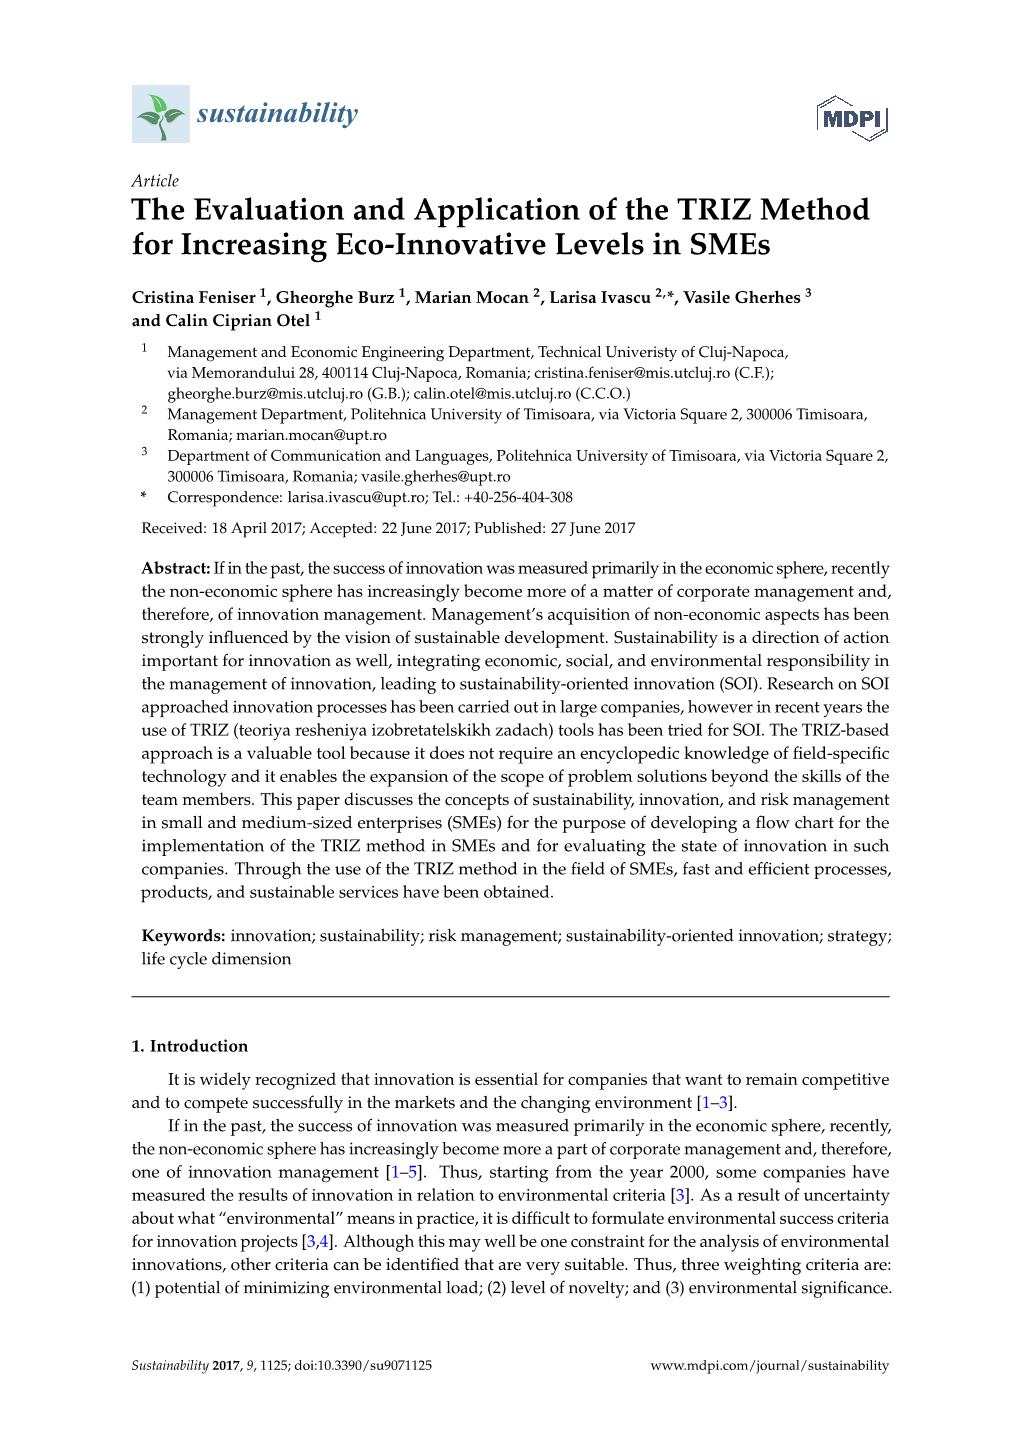 The Evaluation and Application of the TRIZ Method for Increasing Eco-Innovative Levels in Smes